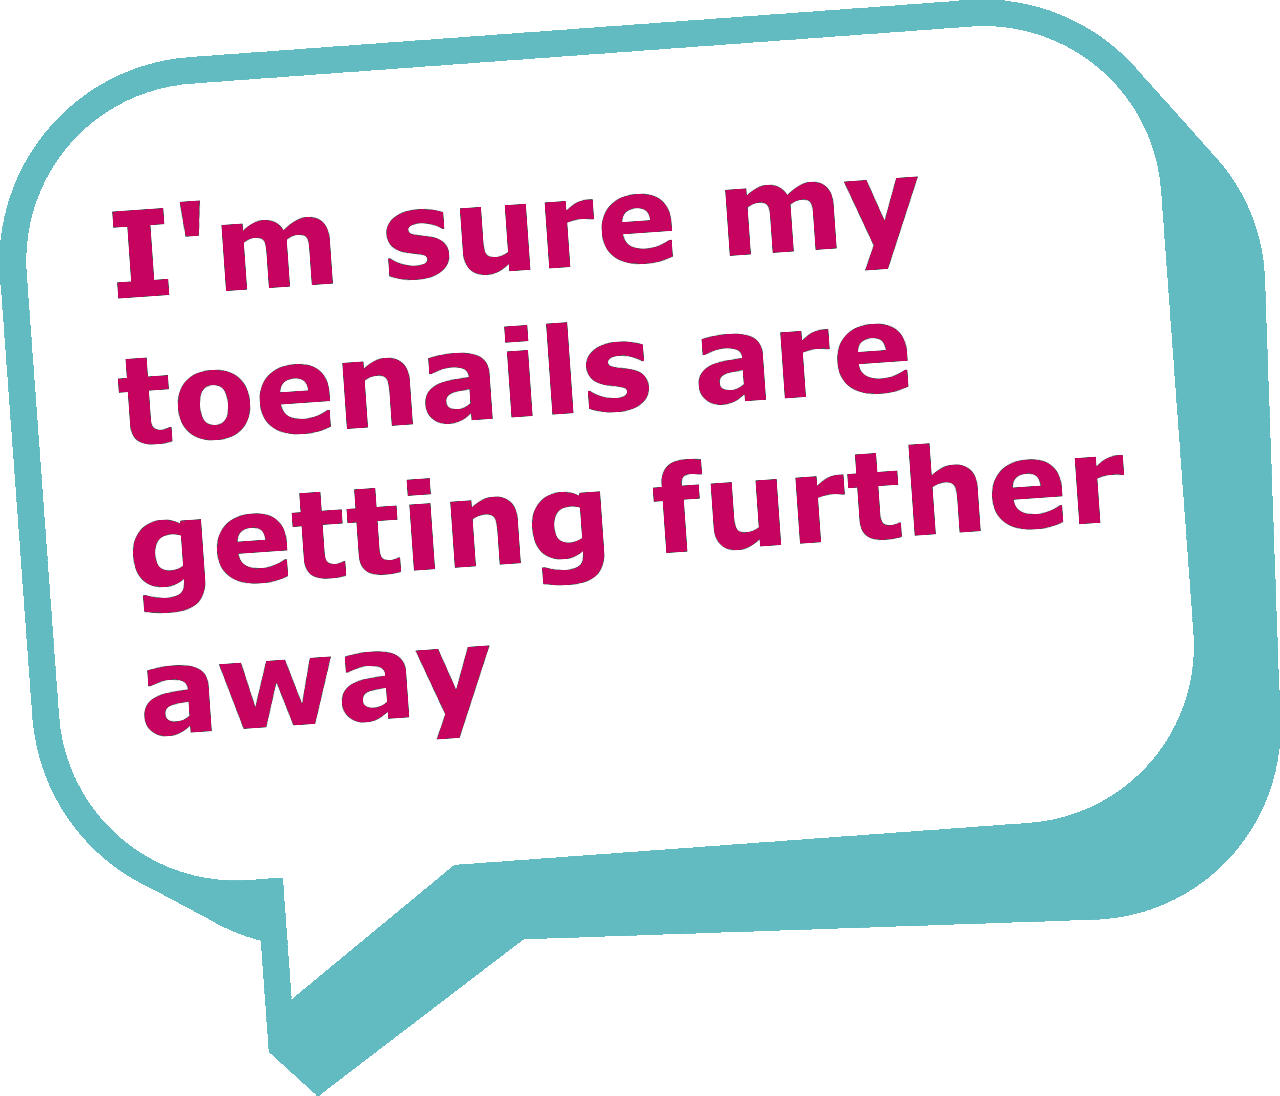 Speech bubble saying "I'm sure my toenails are getting further away"